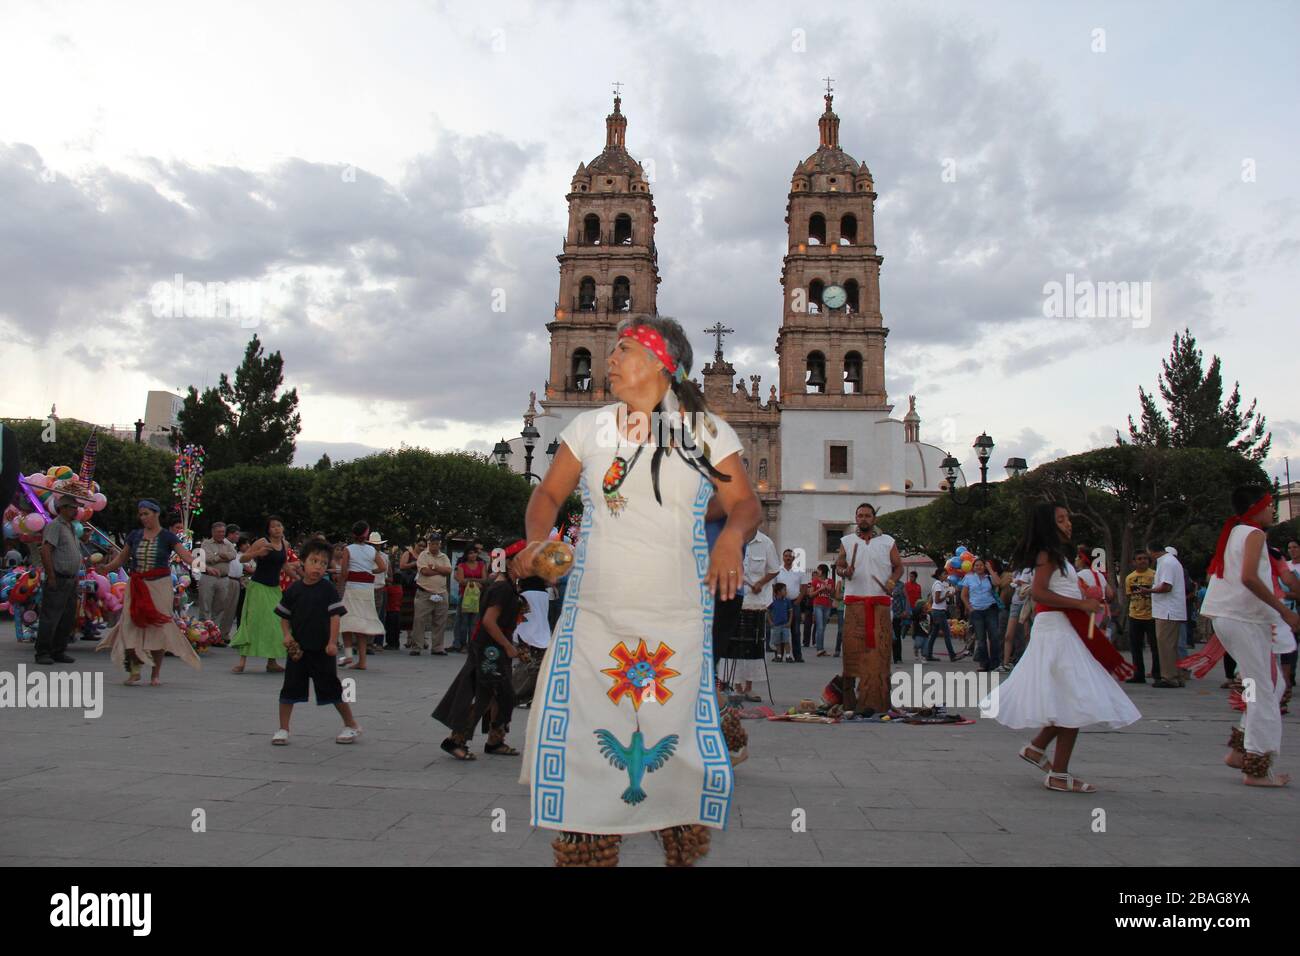 Historical Center of Durango, Durango, Mexico. Durango architecture and old buildings. Durango Cathedral, Kiosk. Mexican traditions, popular fair in M Stock Photo